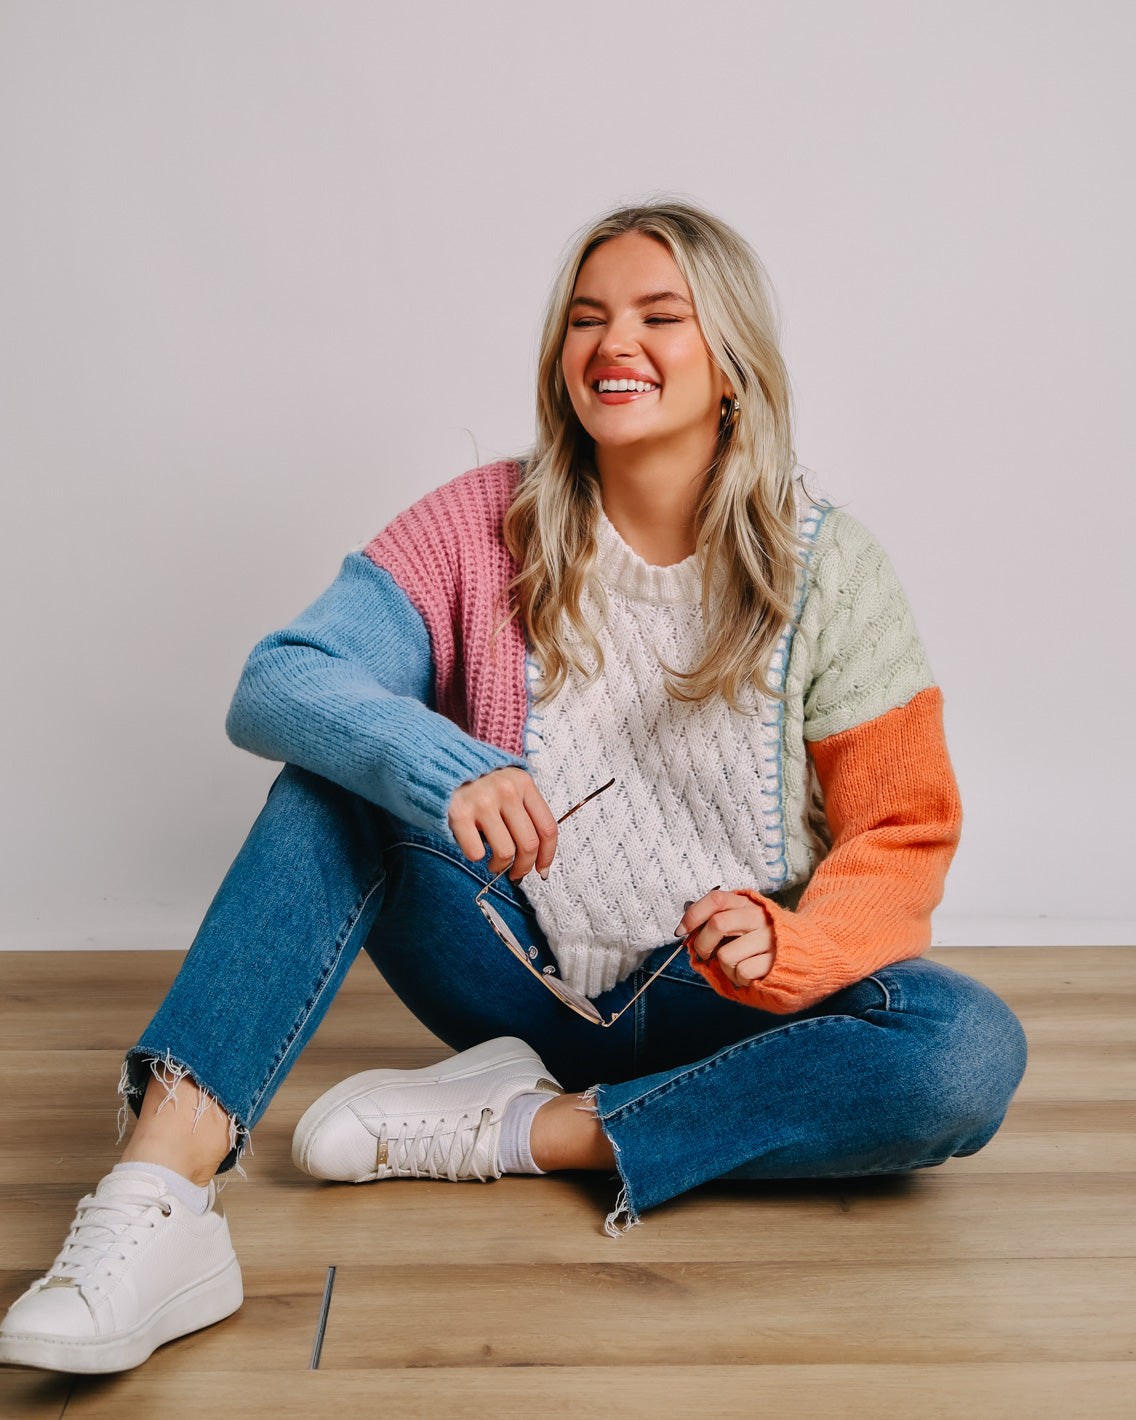 Model sitting on the ground in jeans and a colorful sweater.